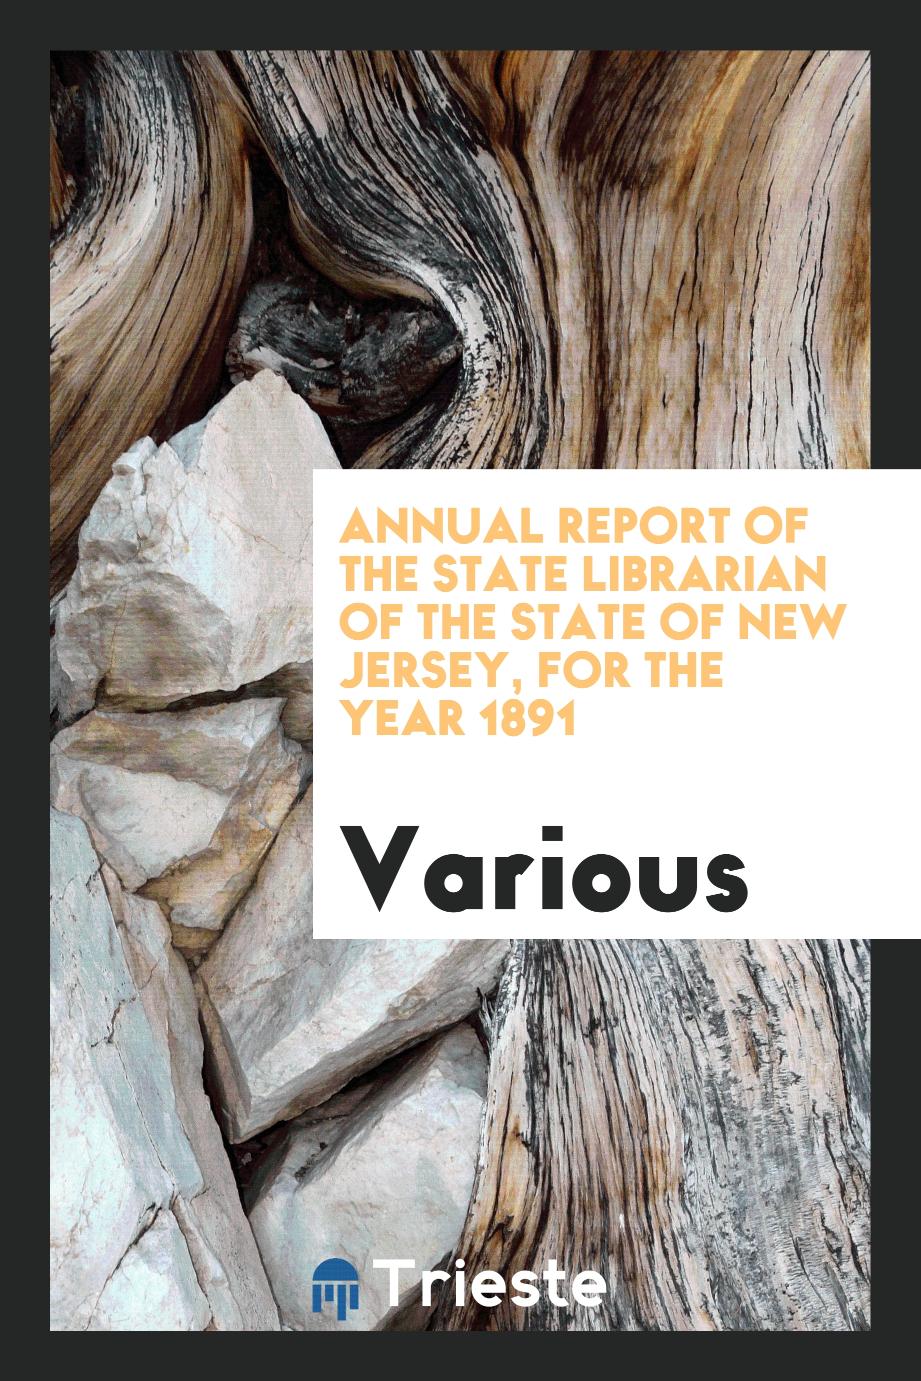 Annual Report of the State Librarian of the State of New Jersey, for the year 1891